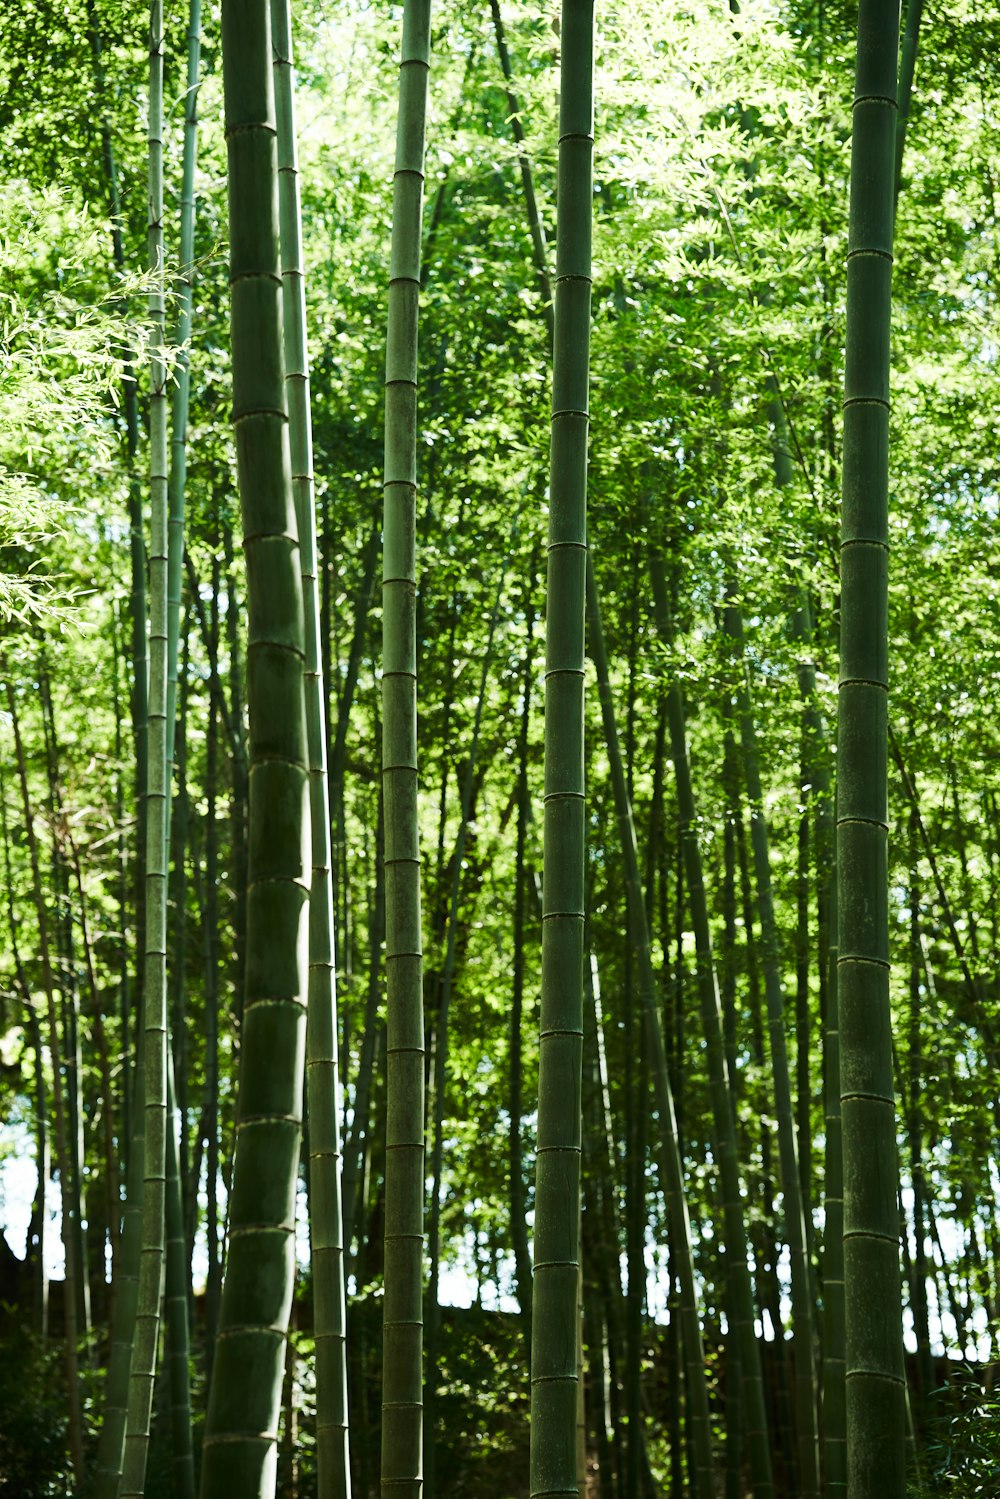 a group of tall bamboo trees standing next to each other